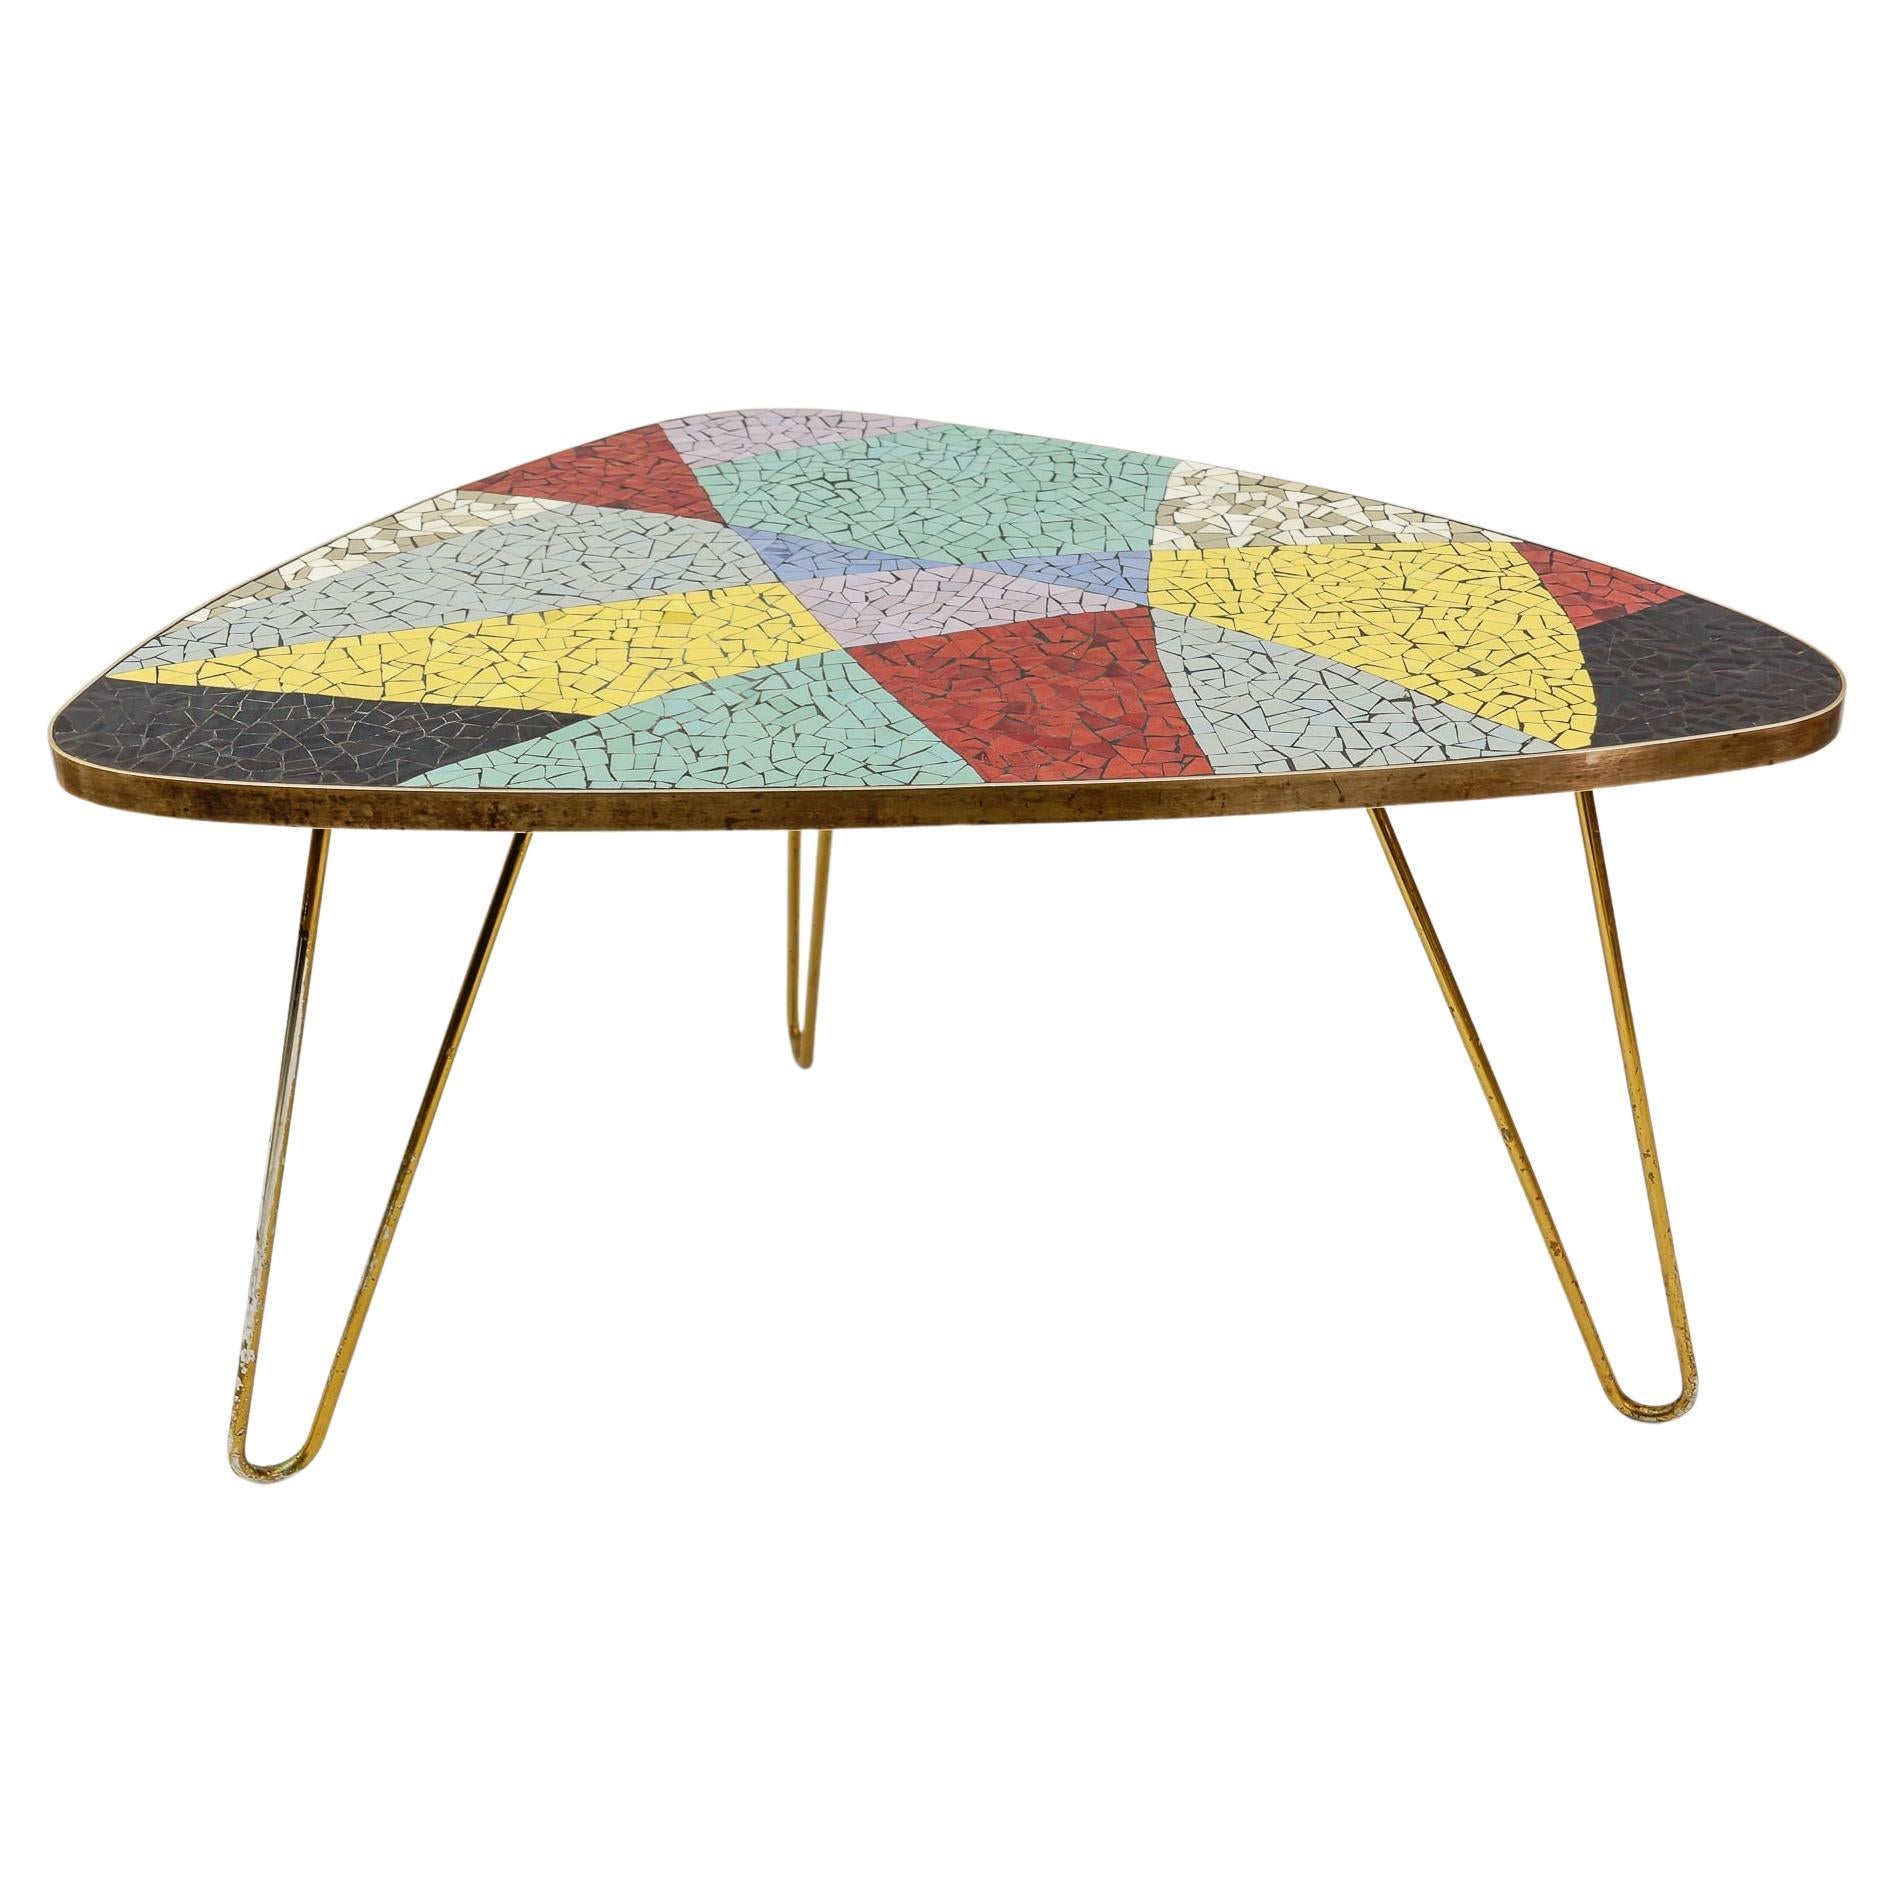 Colorful Mosaic and Brass Coffee Table, 1950s Italy